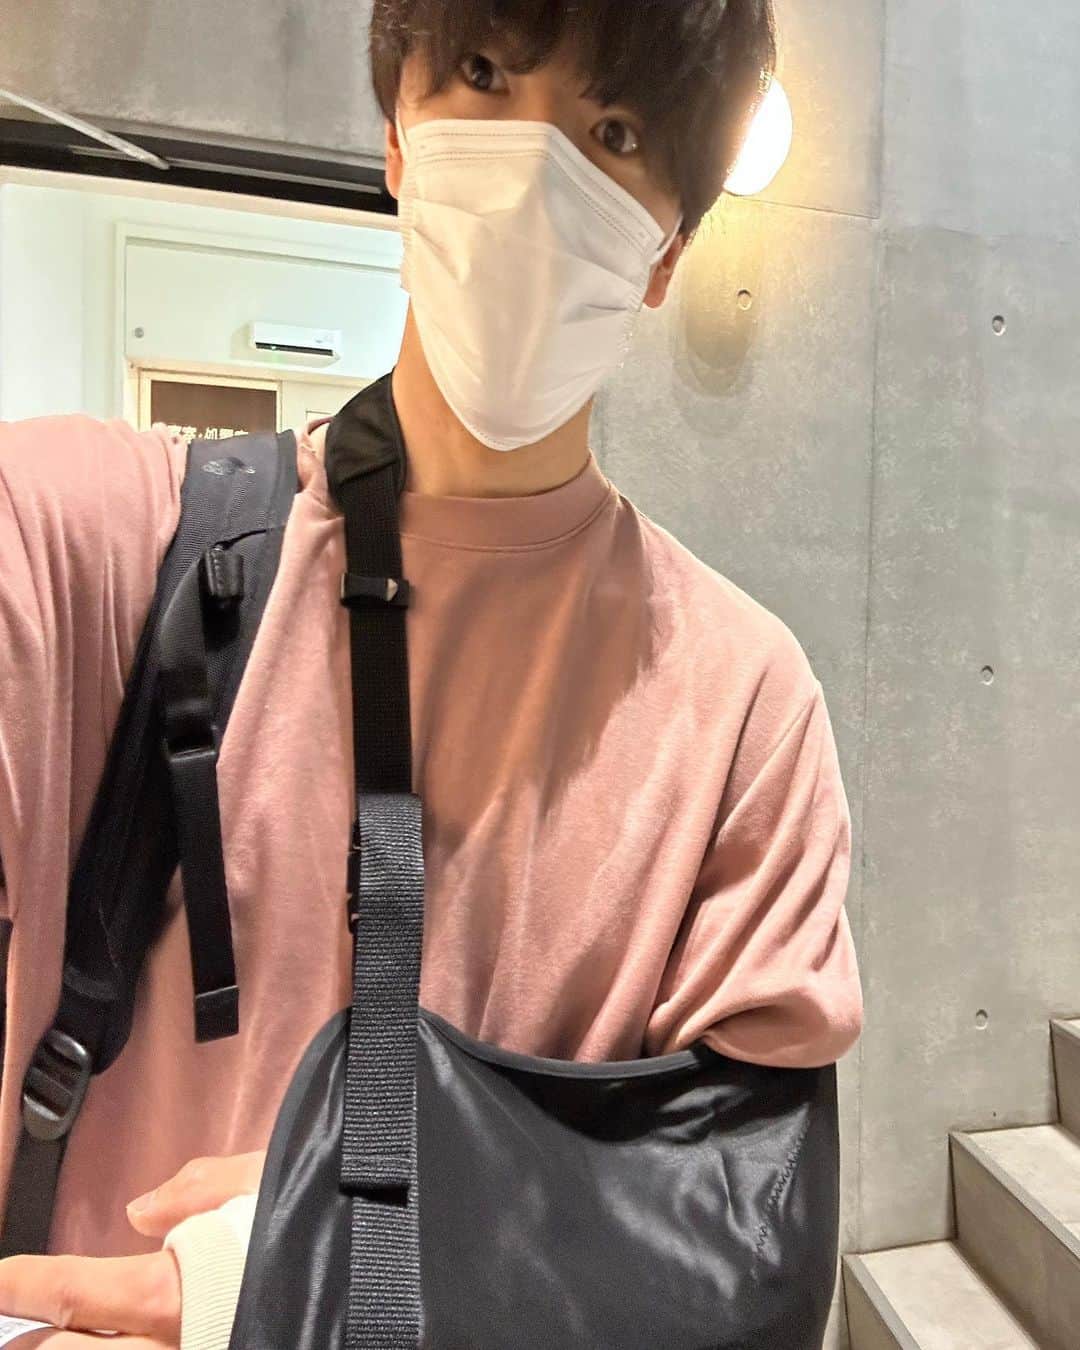 藤井快のインスタグラム：「Unfortunately, I decided to next BWC Round  has been cancelled.  The other day, I had another examination of the elbow that was injured last week, and it seems that the ligaments on the inside of the elbow and the pronation flexor muscles of the forearm were damaged. (Last time it was too swollen and hard to see) I was told by doctor that a 2weeks immobilization in a cast and rest would be the shortest and most effective treatment. So, in the next two weeks, I would like to fully heal my left arm and do my best in training other parts. I will do my best to make it in time for June.  残念なお知らせになってしまいますが、BWC第3戦ソルトレイクシティはキャンセルすることになりました。  先週に怪我をした肘を先日もう一度検査したところ、肘の内側の靱帯、前腕の回内屈筋群を損傷していたようです。（前回は腫れすぎていて分かりづらかった） 2週間のギプスでの固定して安静にすることが最短で最大の治療効果を得られるとお医者さんに言ってもらいました。 ということで、この2週間は左腕はしっかり治し、他の部位のトレーニングを頑張りたいと思います。  今度こそ！！！ 6月のヨーロッパには間に合わせます！  ゆる募:でっかいスラブがあるジム教えてください🙏笑  @team_edelrid @morinagatraininglab」